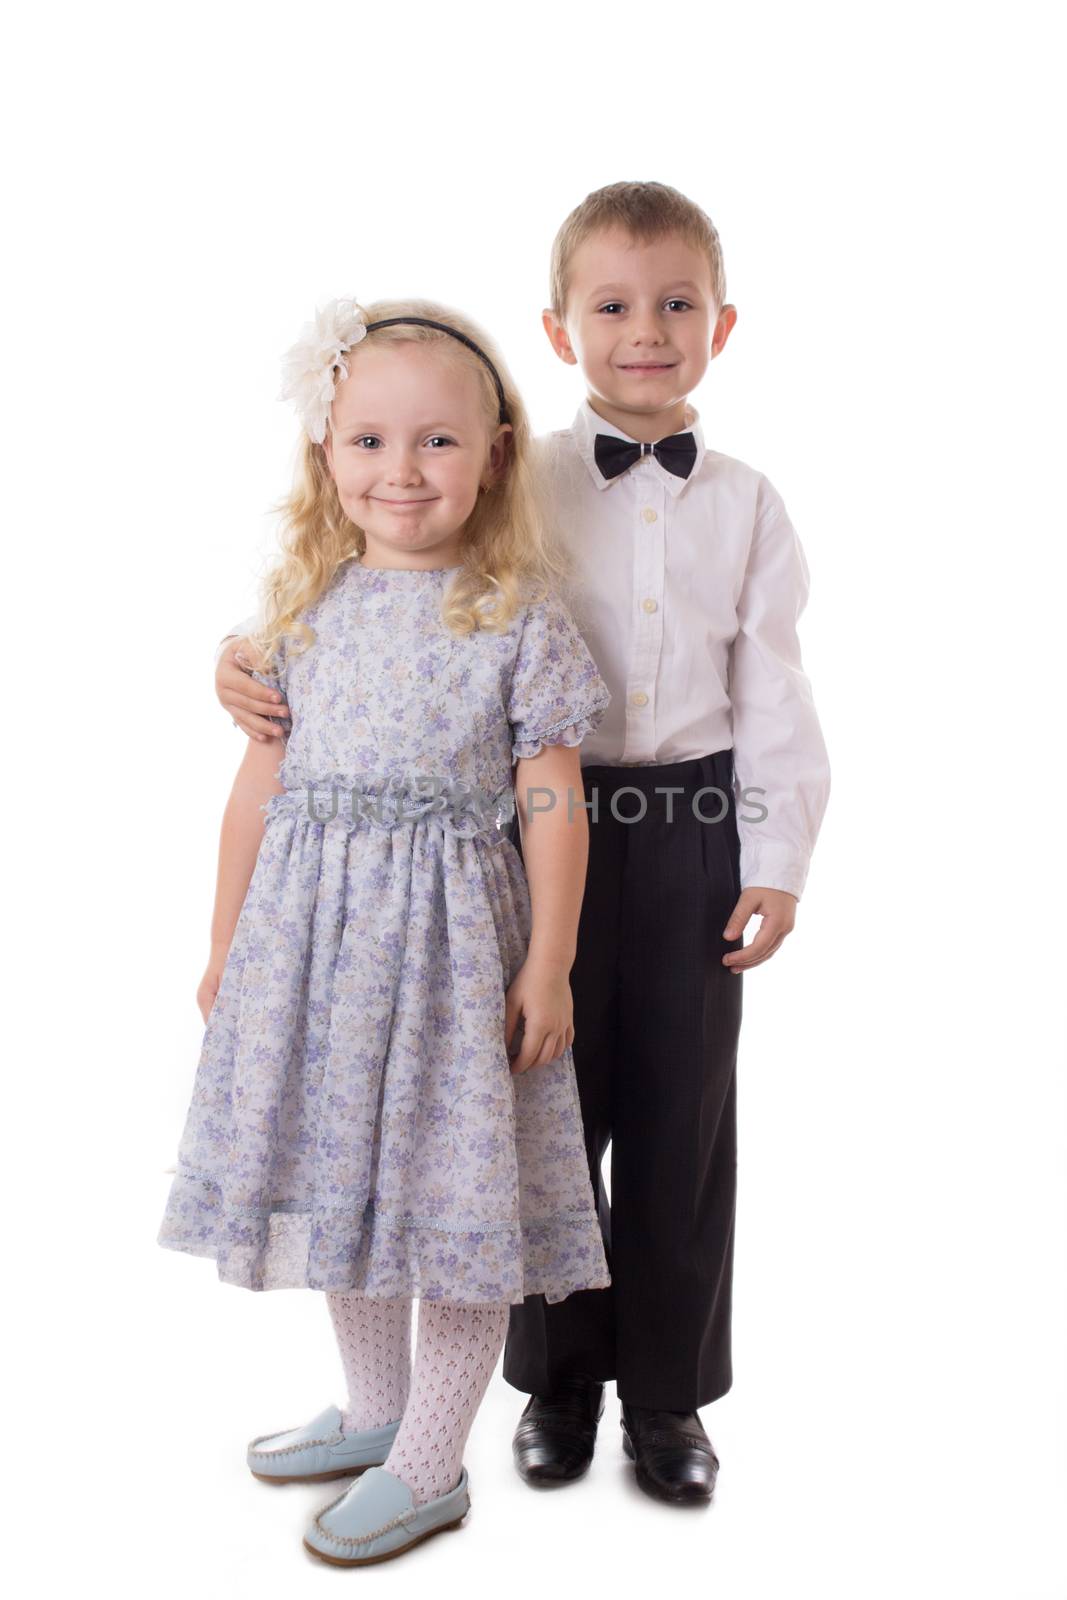 Smiling brother and sister standing together isolated on white